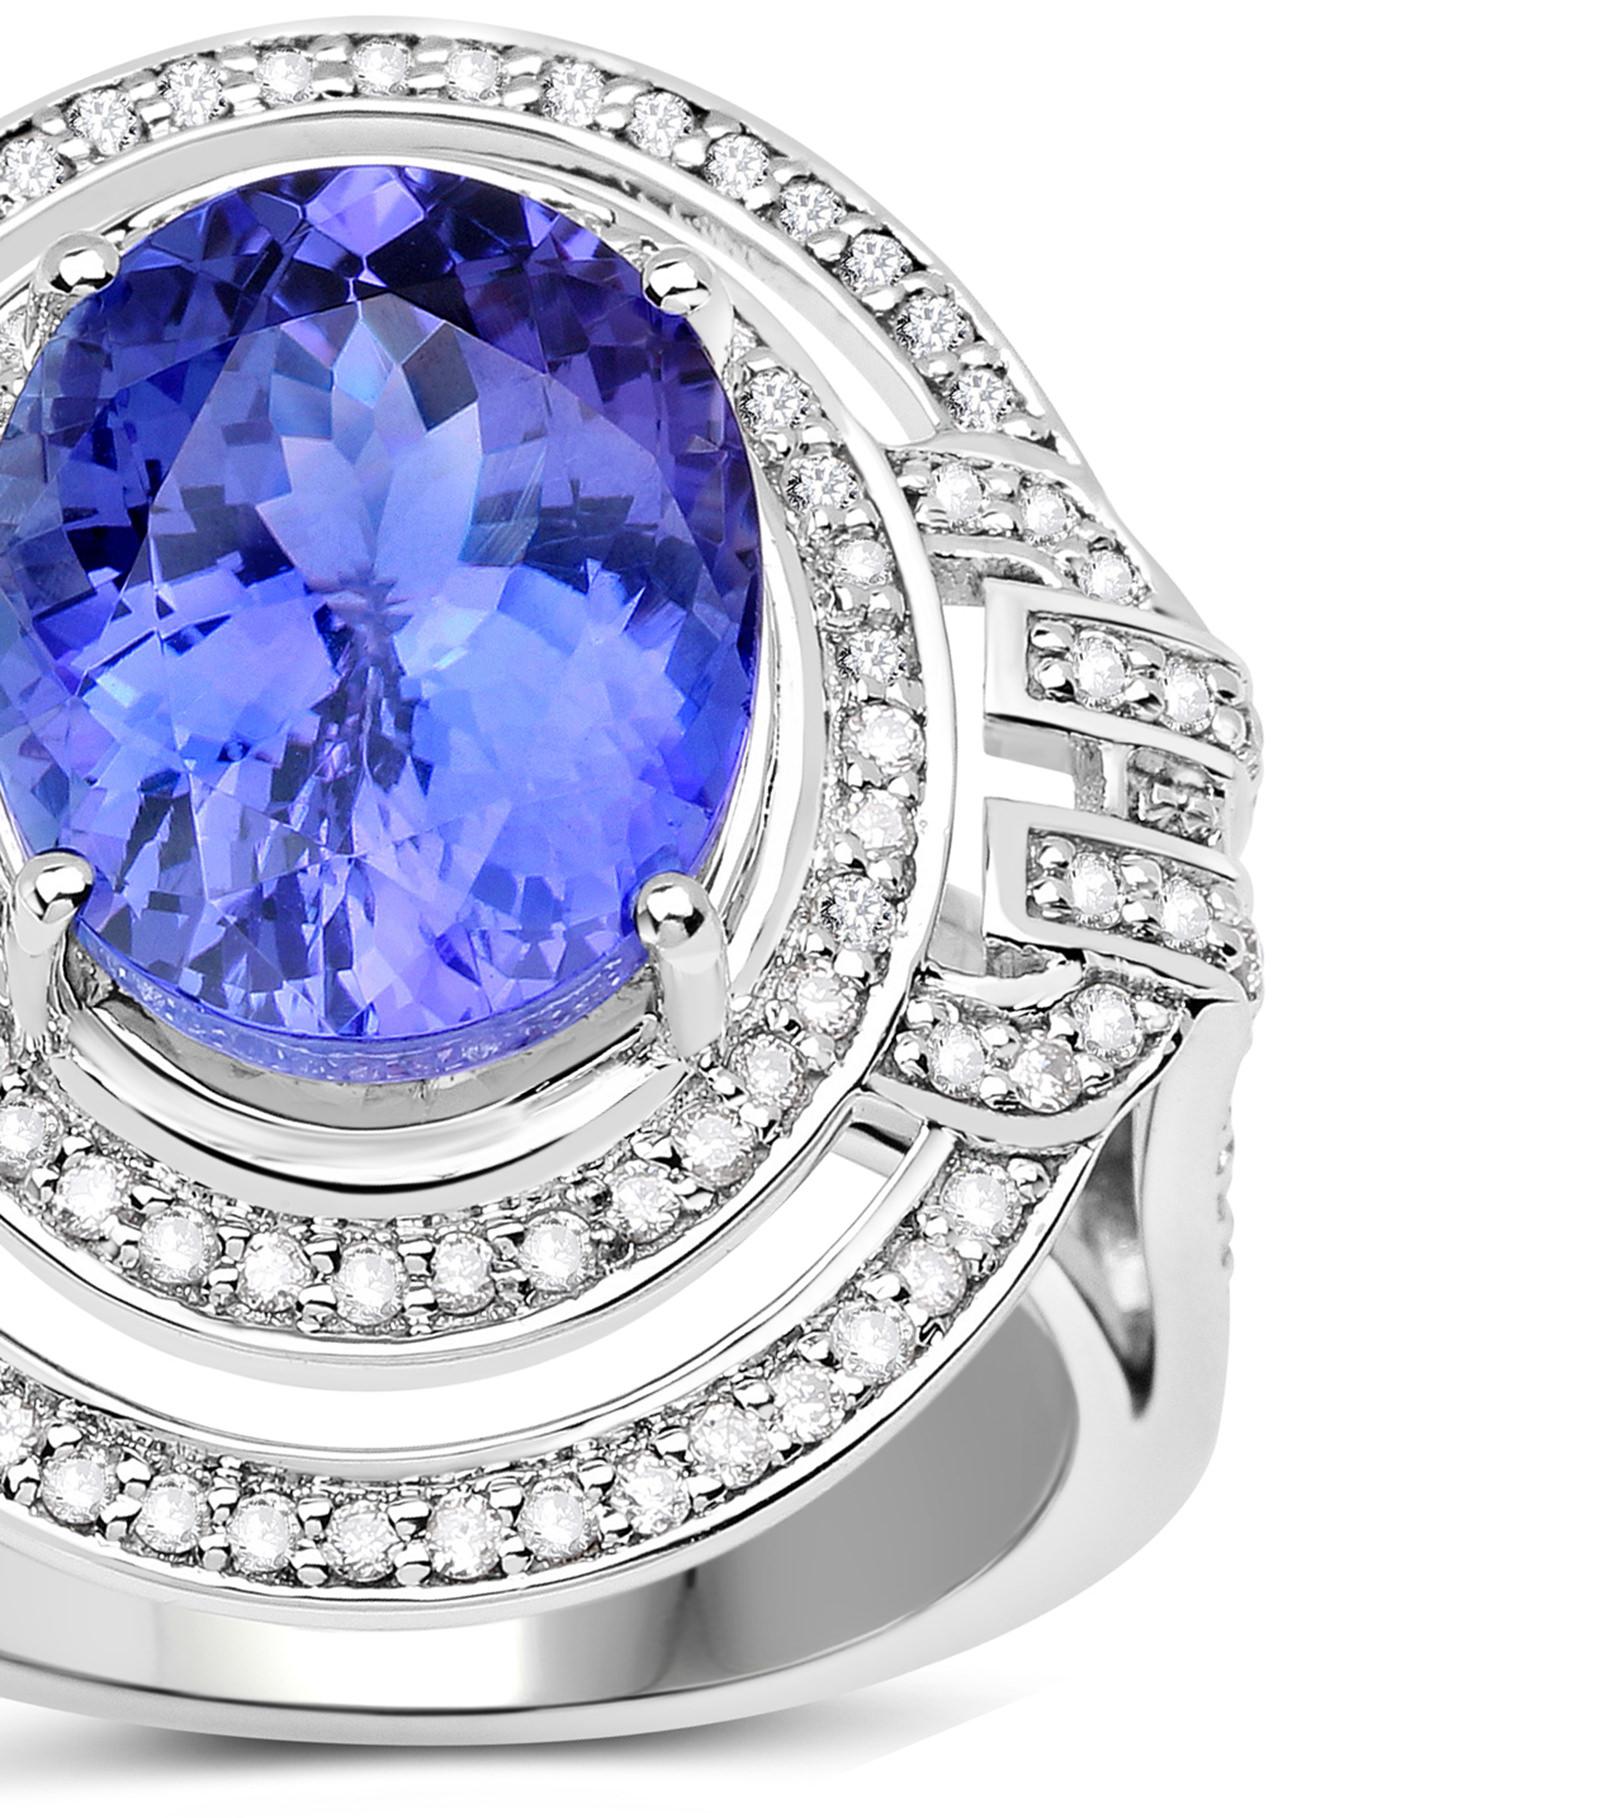 Natural Tanzanite and Diamond Cocktail Ring 6.85 Carats 14k White Gold In Excellent Condition For Sale In Laguna Niguel, CA